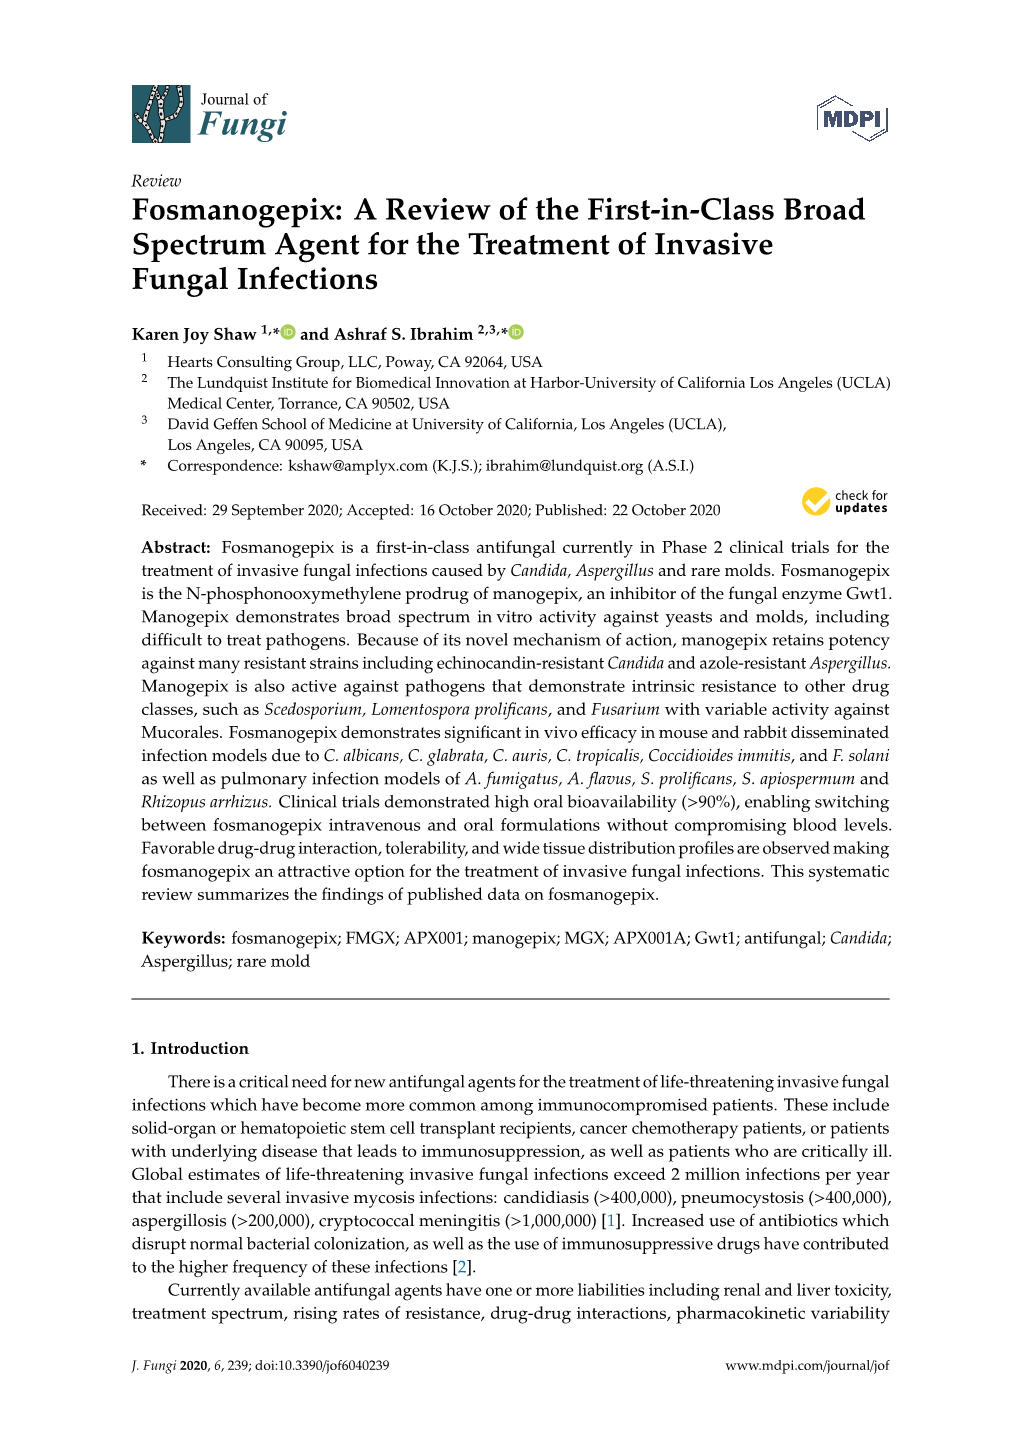 Fosmanogepix: a Review of the First-In-Class Broad Spectrum Agent for the Treatment of Invasive Fungal Infections